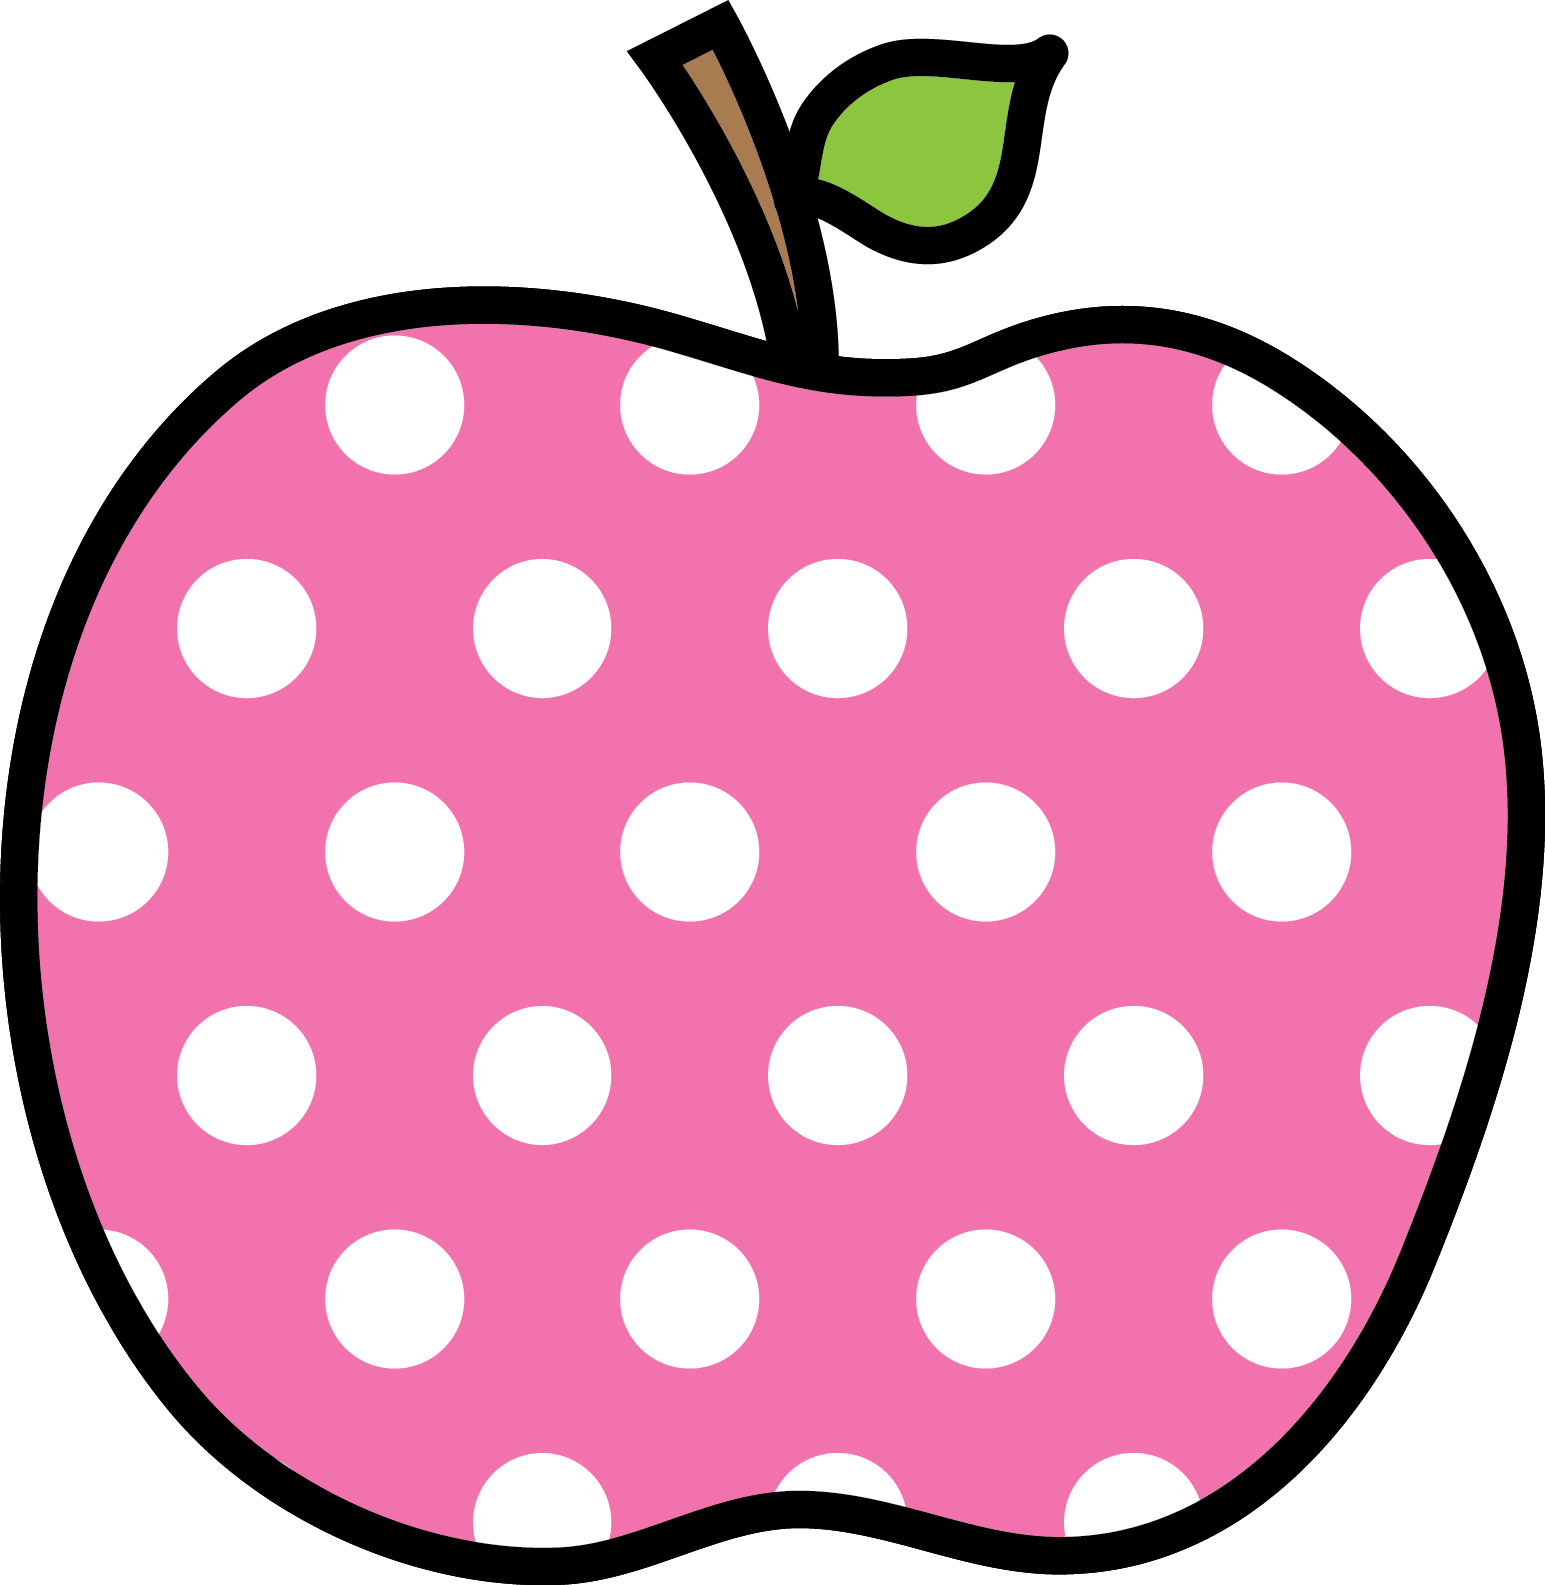 Chevron apple clipart clipart images gallery for free